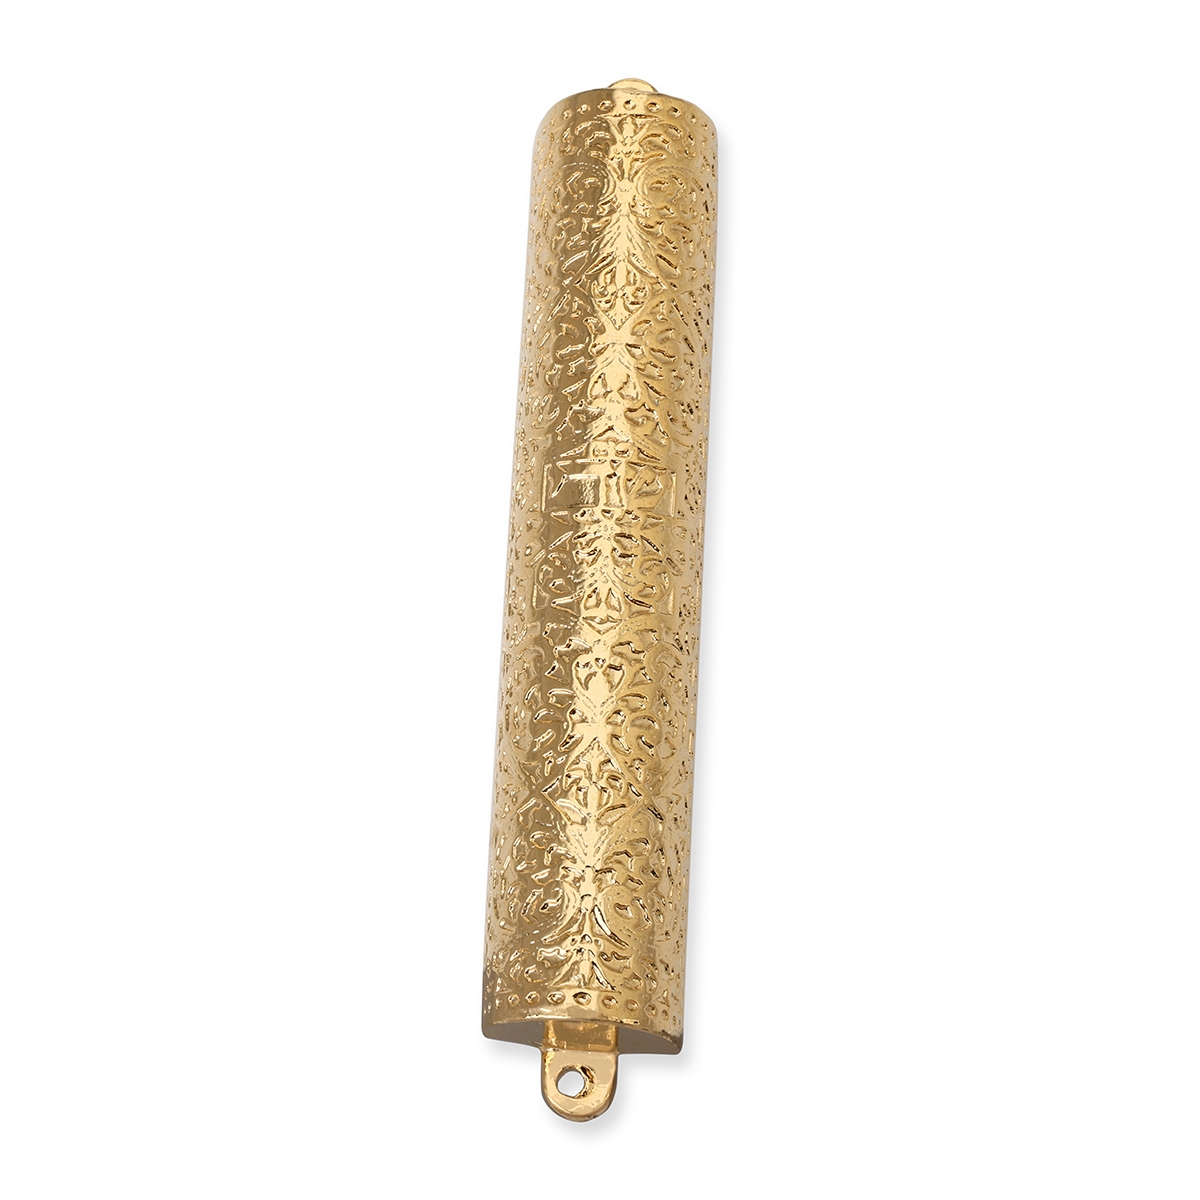 Gold-Plated Mezuzah Case, 17th Century Germany - Israel Museum Collection - 1